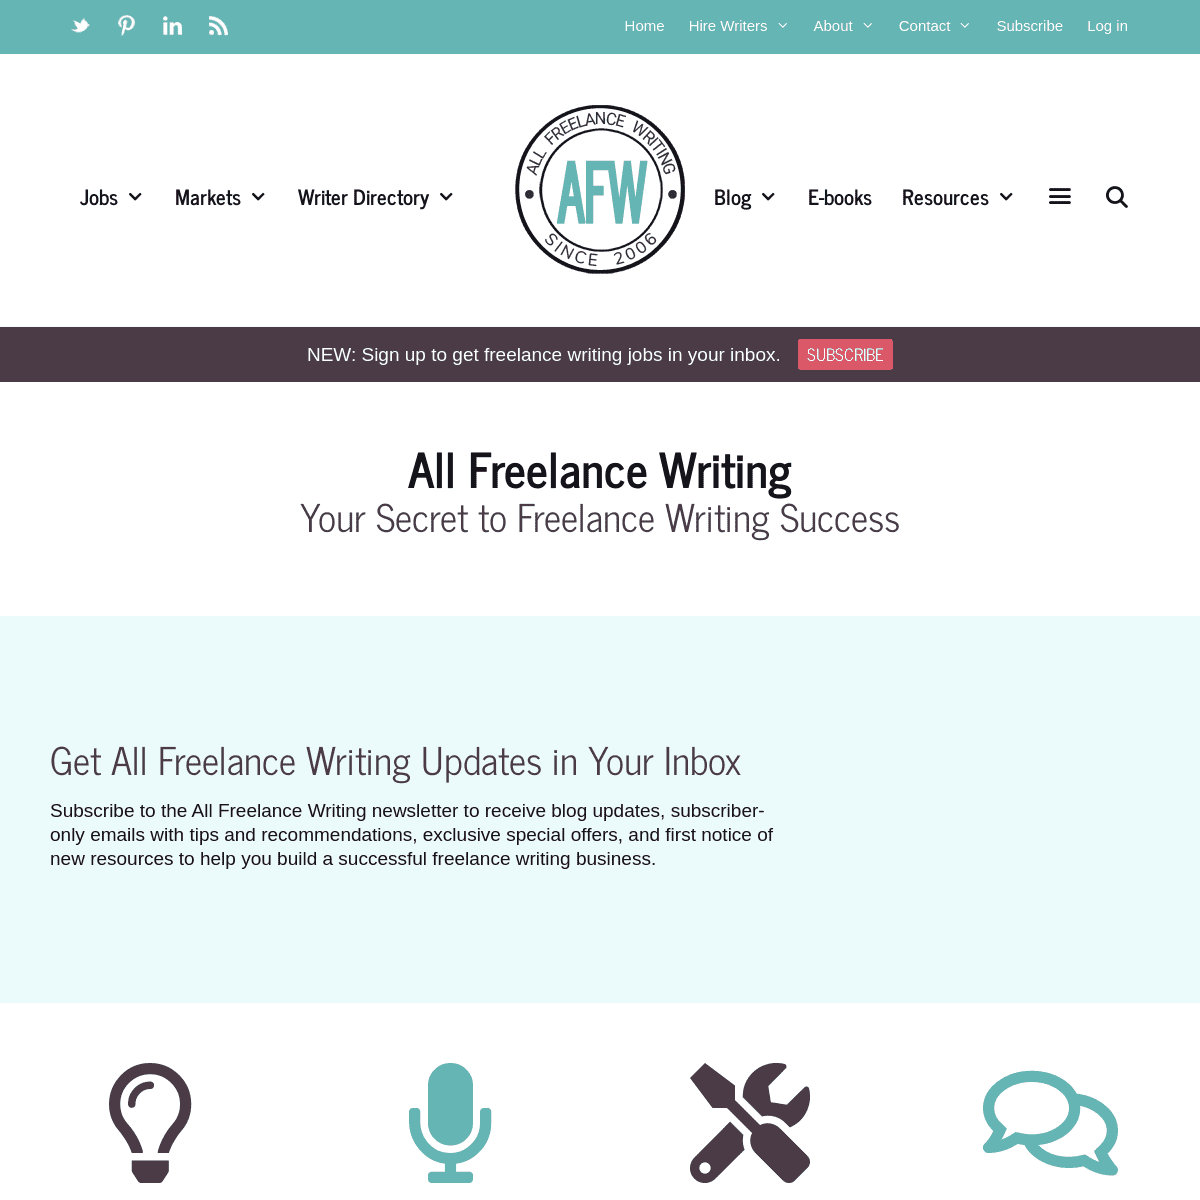 A complete backup of https://allfreelancewriting.com